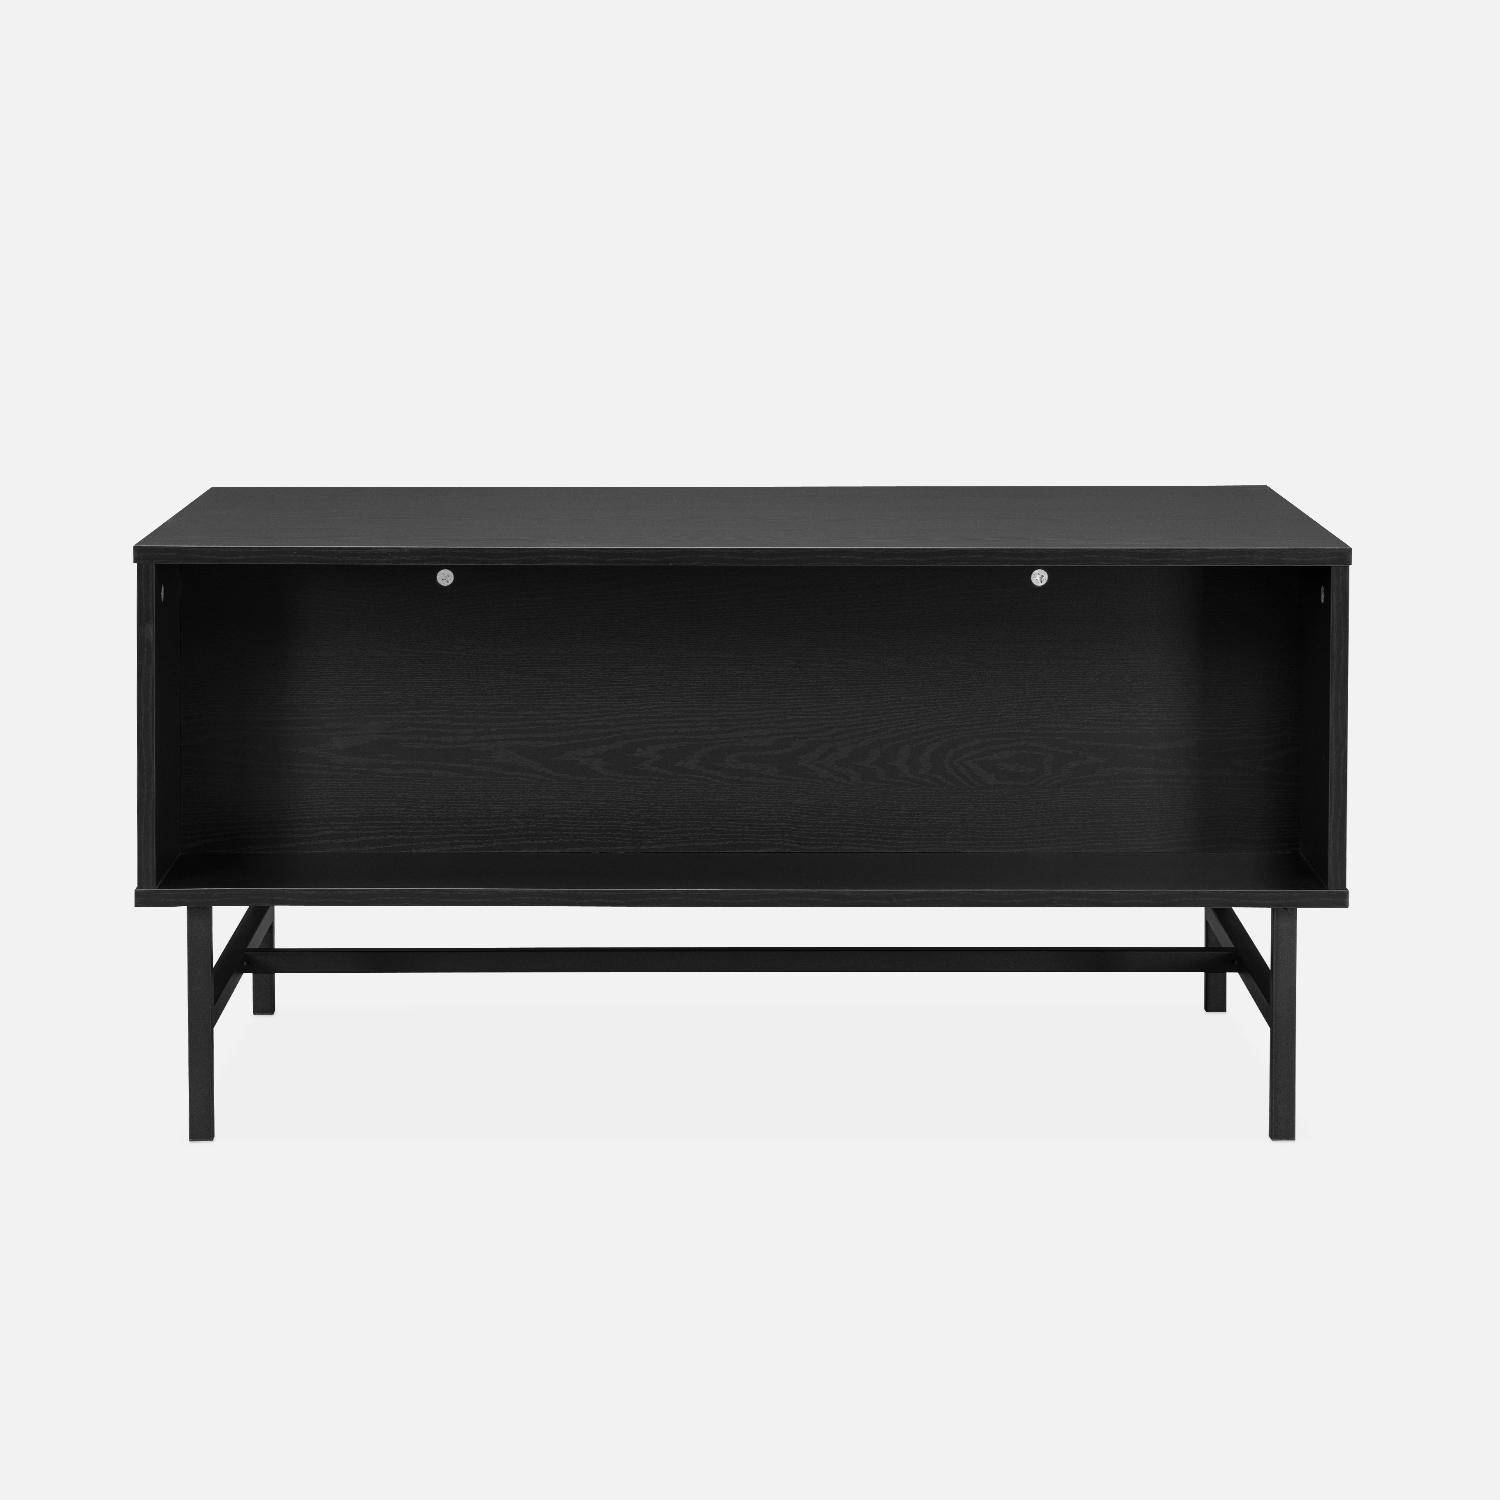 Coffee table with one drawer and one storage nook, ridged effect, industrial style, 100x59x50.2cm - Bazalt - Black,sweeek,Photo6